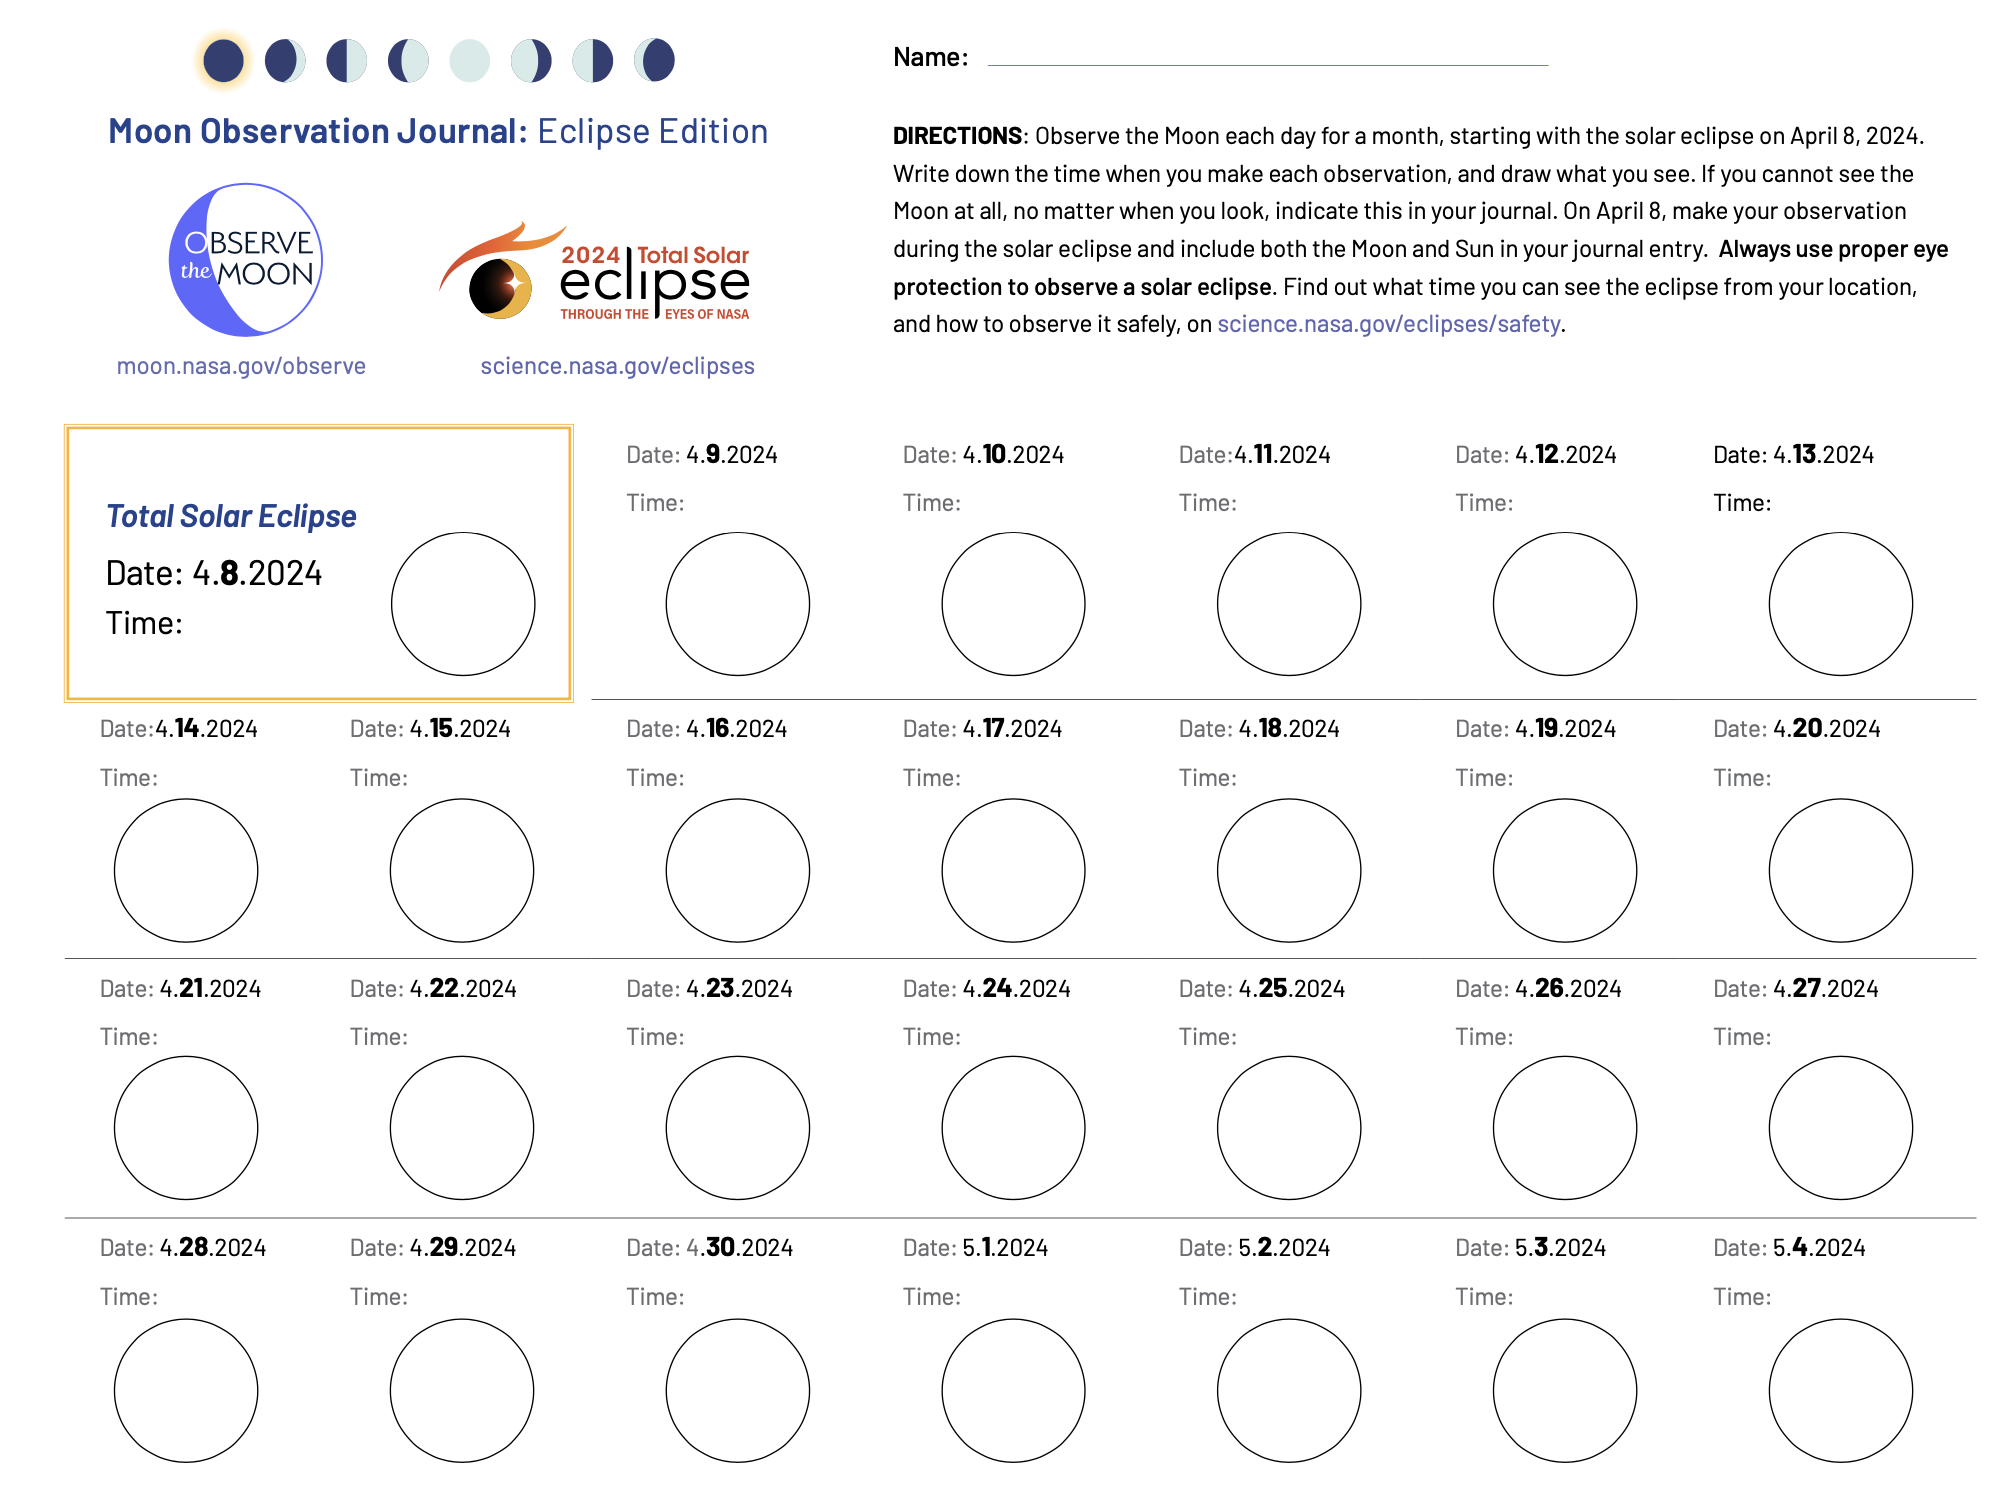 A page of the Moon journal. There are many empty circles on the page, labeled in chronological order from April 8, 2024, to May 4, 2024. The first circle is labeled for the April 8, 2024 eclipse.